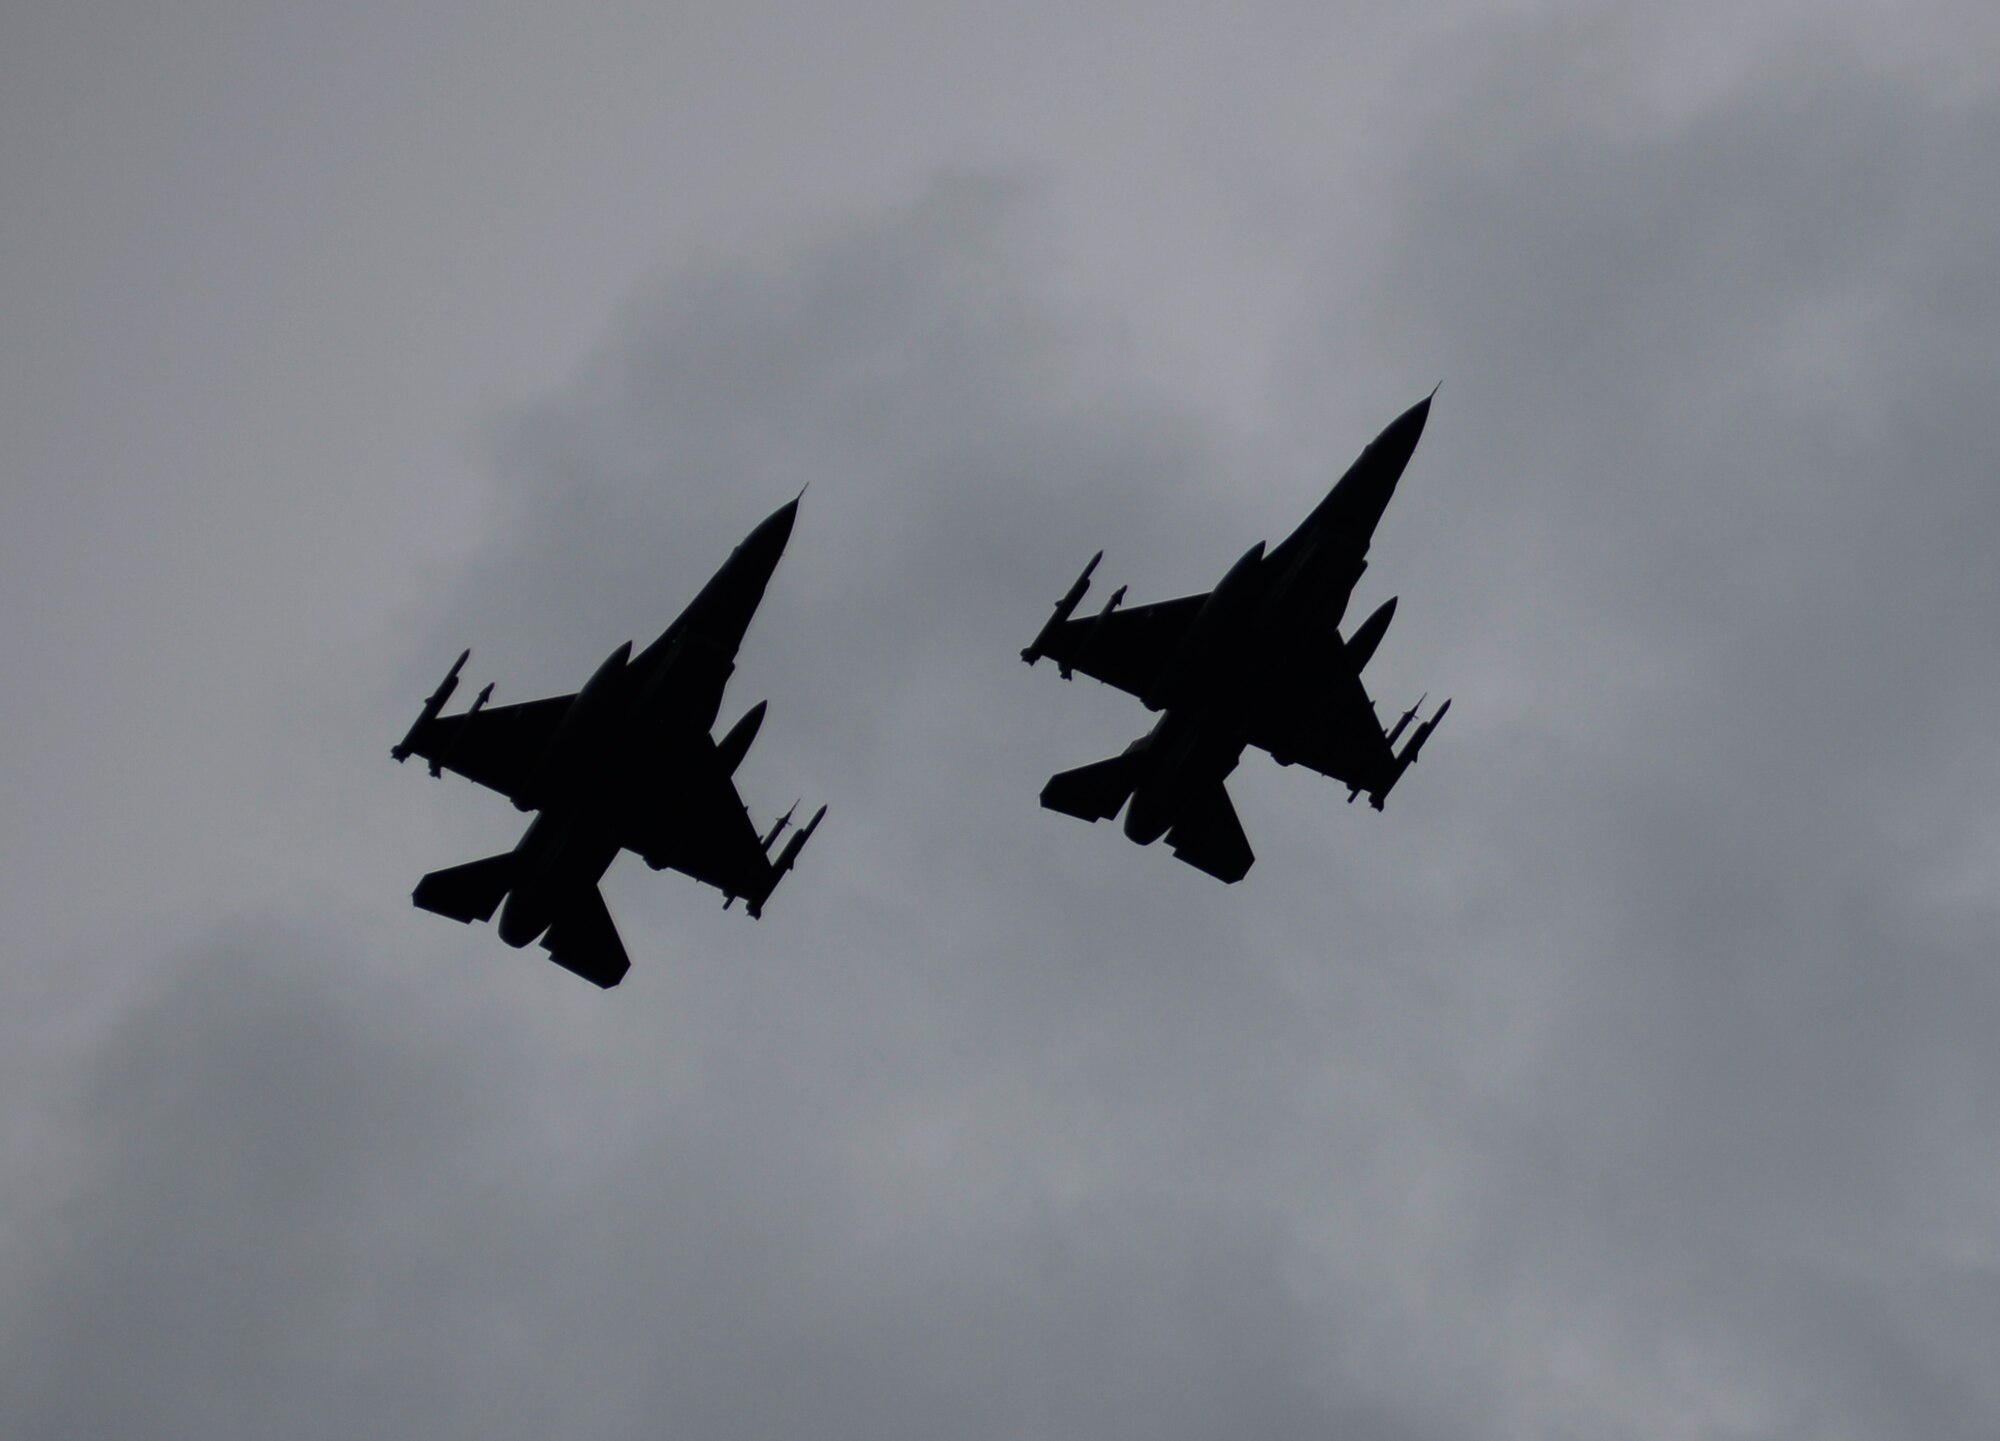 Two F-16 Fighting Falcon fighter aircraft fly over the flightline at Łask Air Base, Poland, May 7, 2014. The Fighting Falcon wields a 20mm cannon, air-to-air missiles, air-to-surface munitions and electronic countermeasure pods as part of its multirole fighter capabilities. (U.S. Air Force photo illustration by Staff Sgt. Joe W. McFadden/Released)